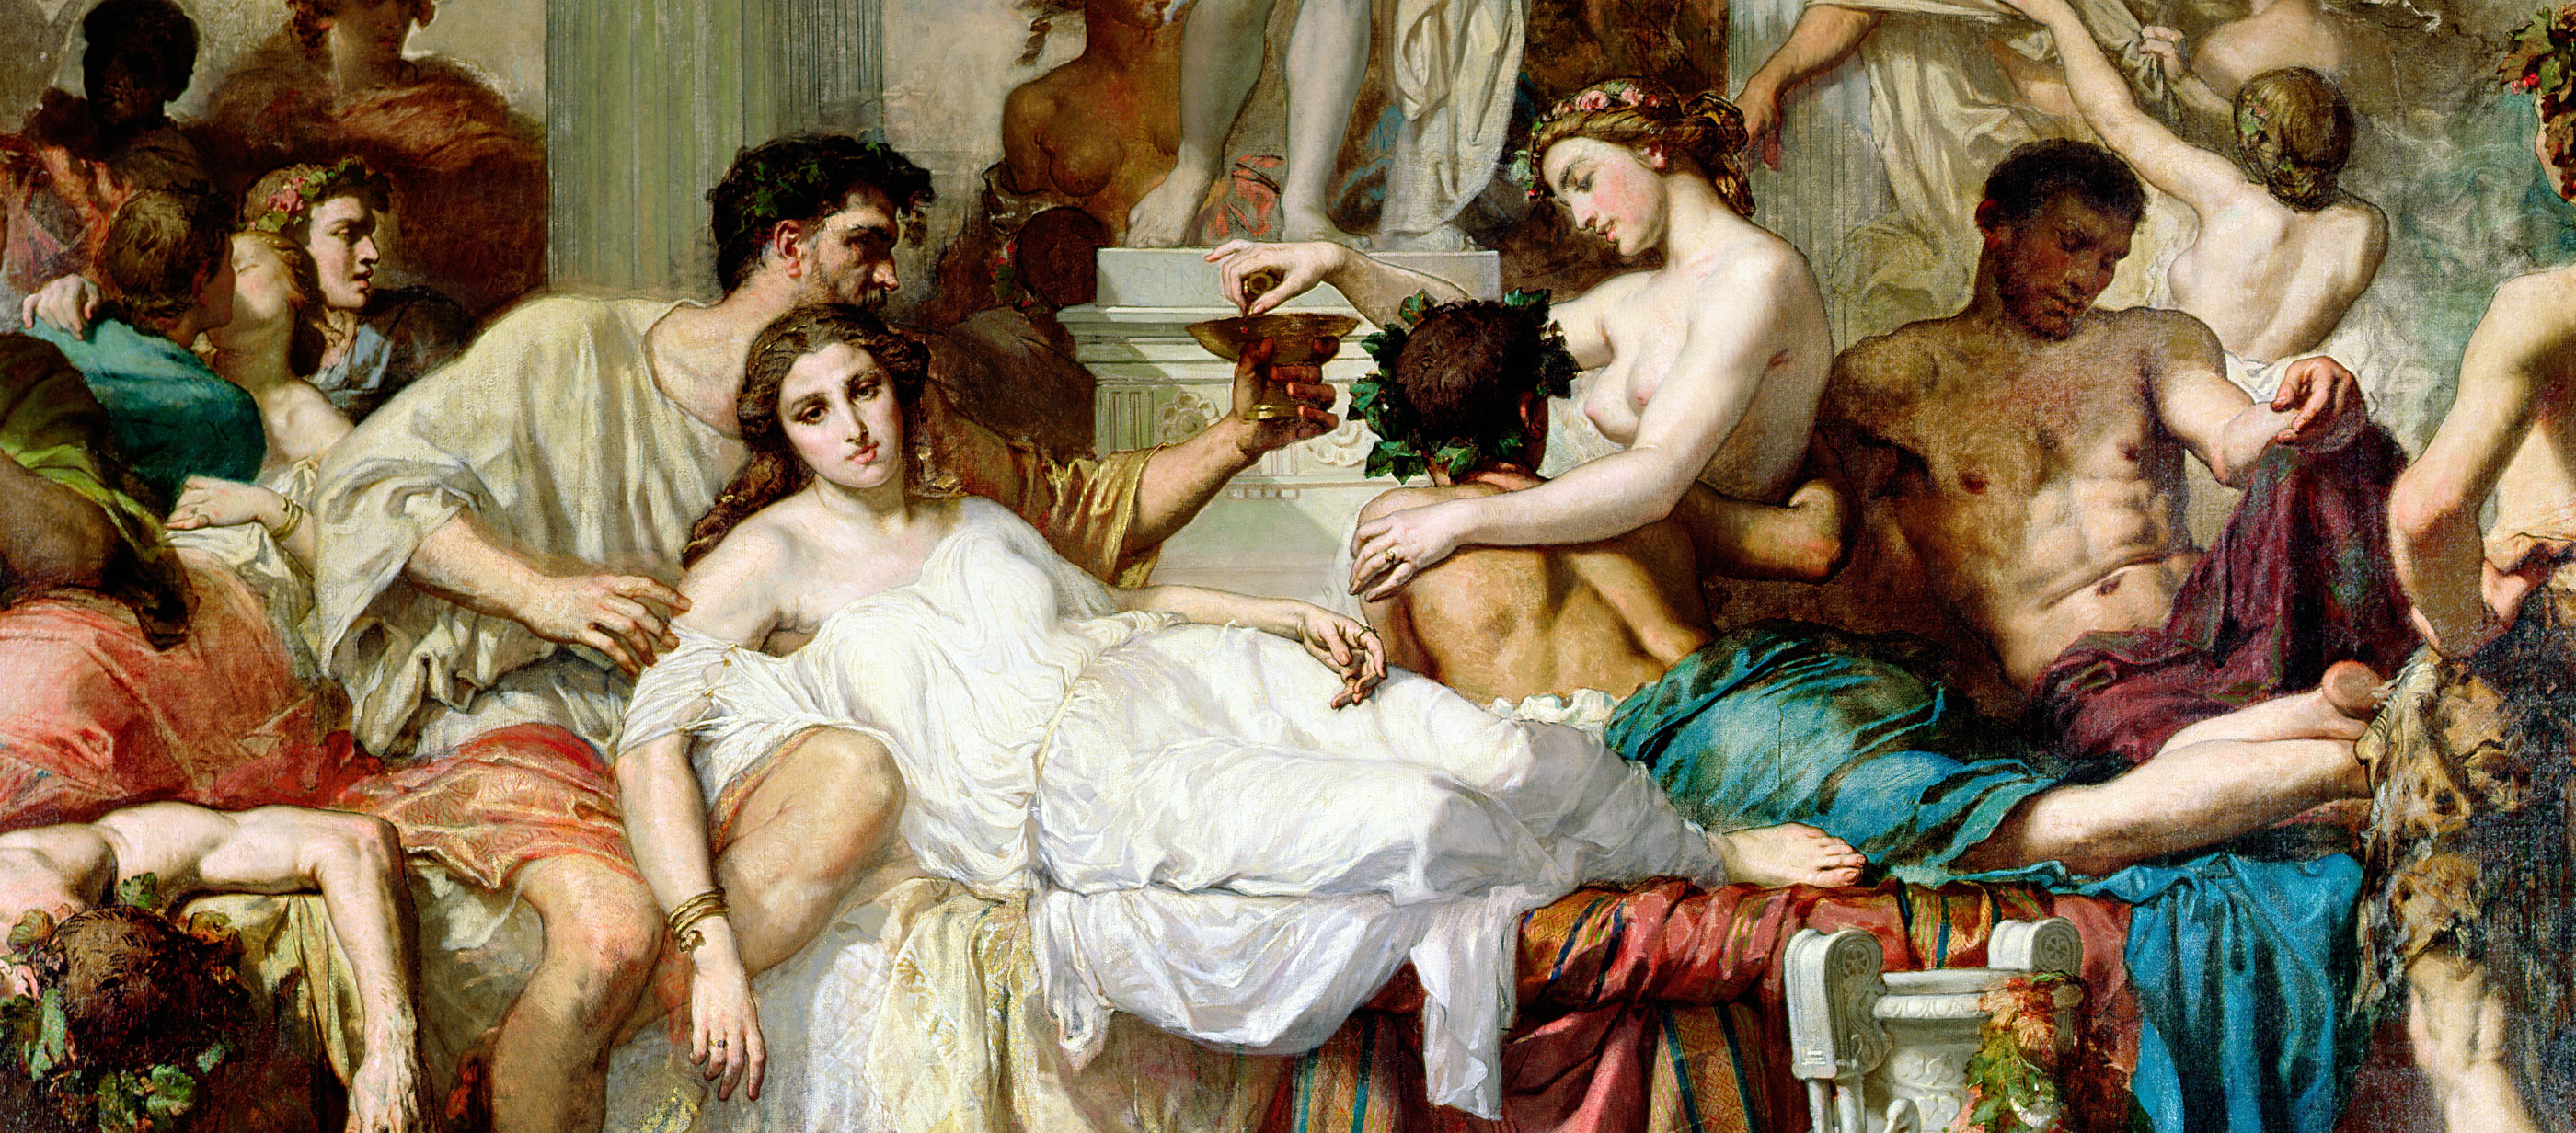 The Romans of the Decadence (detail), by Thomas Couture, 1847. Musée d'Orsay.